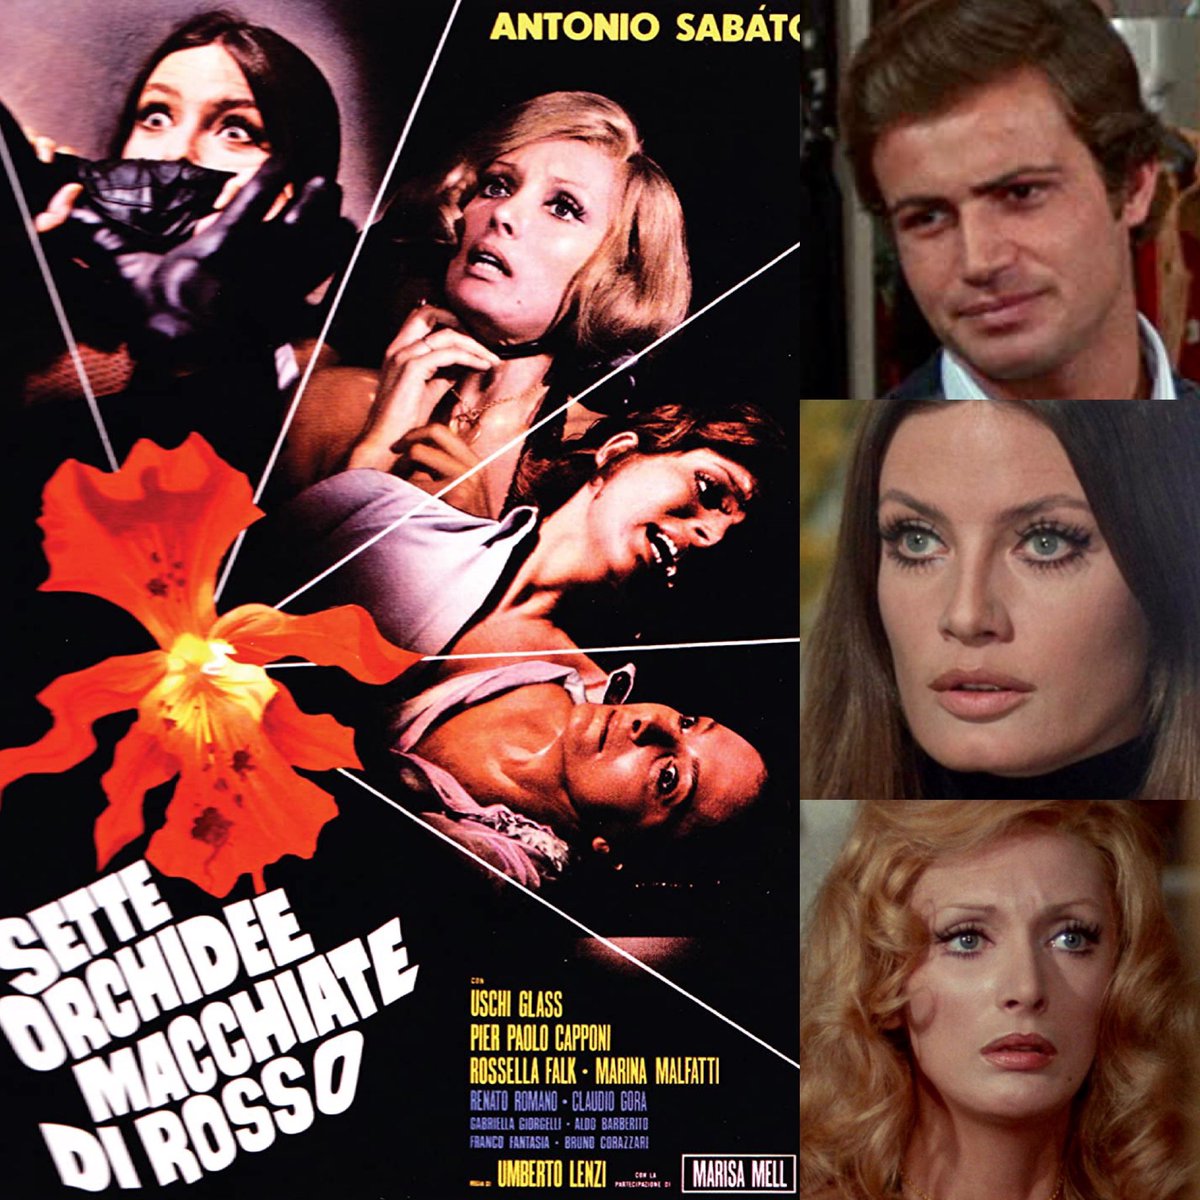 Watching the #giallo film #sevenbloodstainedorchids for the first time